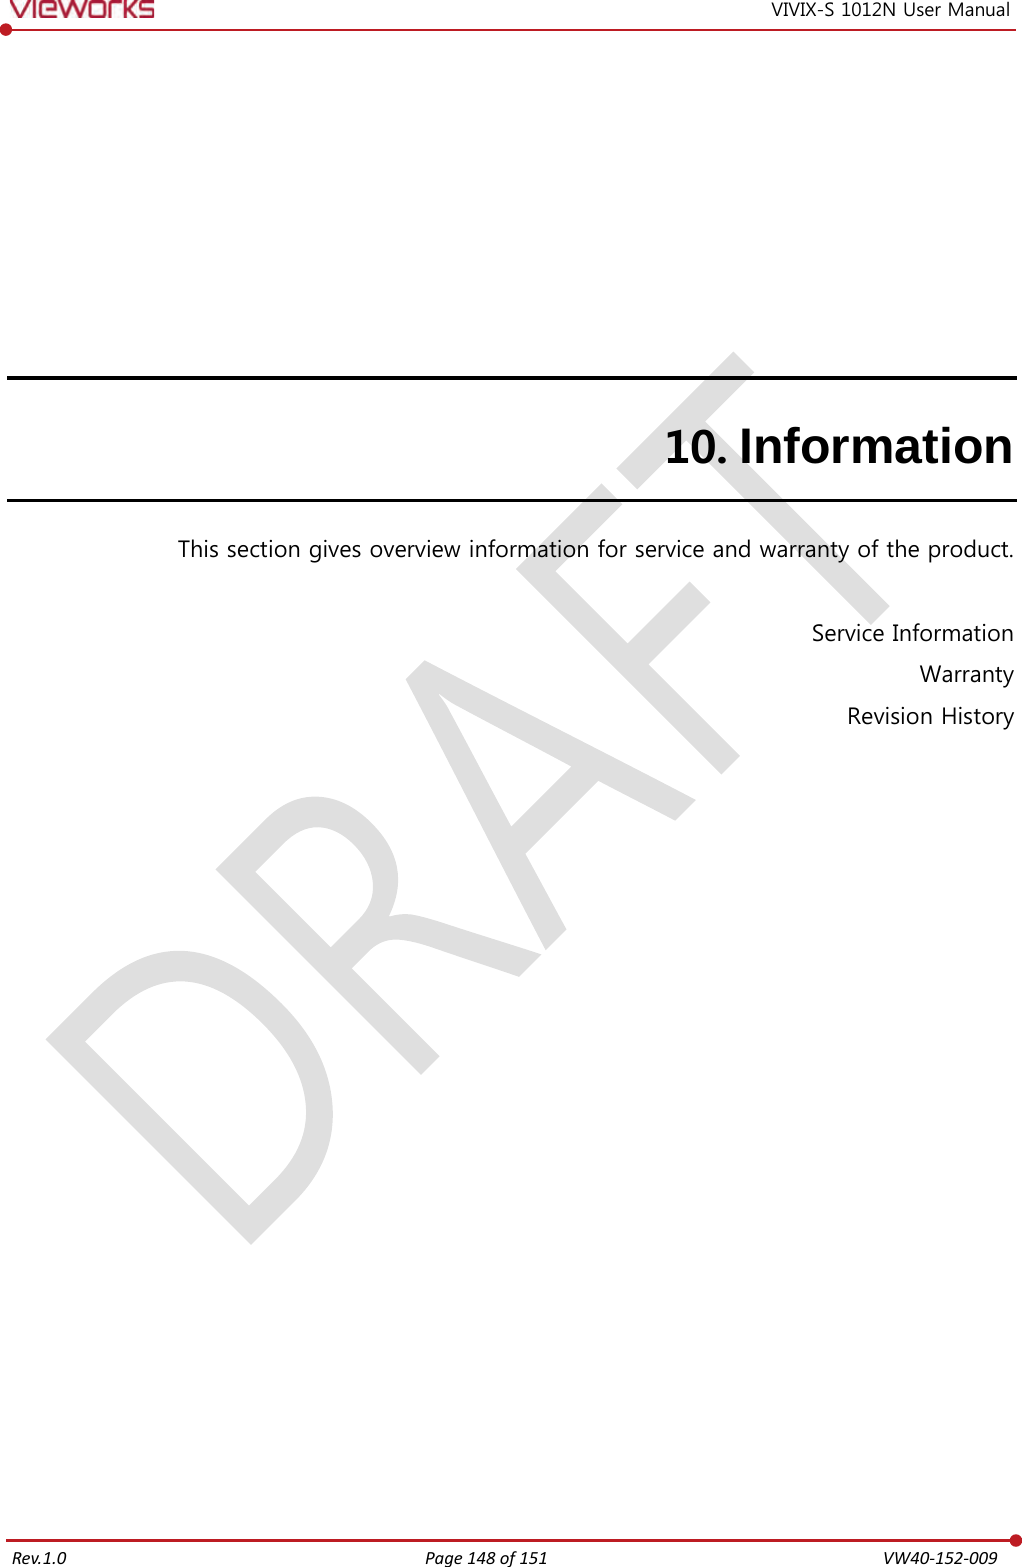   Rev.1.0 Page 148 of 151  VW40-152-009 VIVIX-S 1012N User Manual 10. Information This section gives overview information for service and warranty of the product.  Service Information Warranty Revision History        